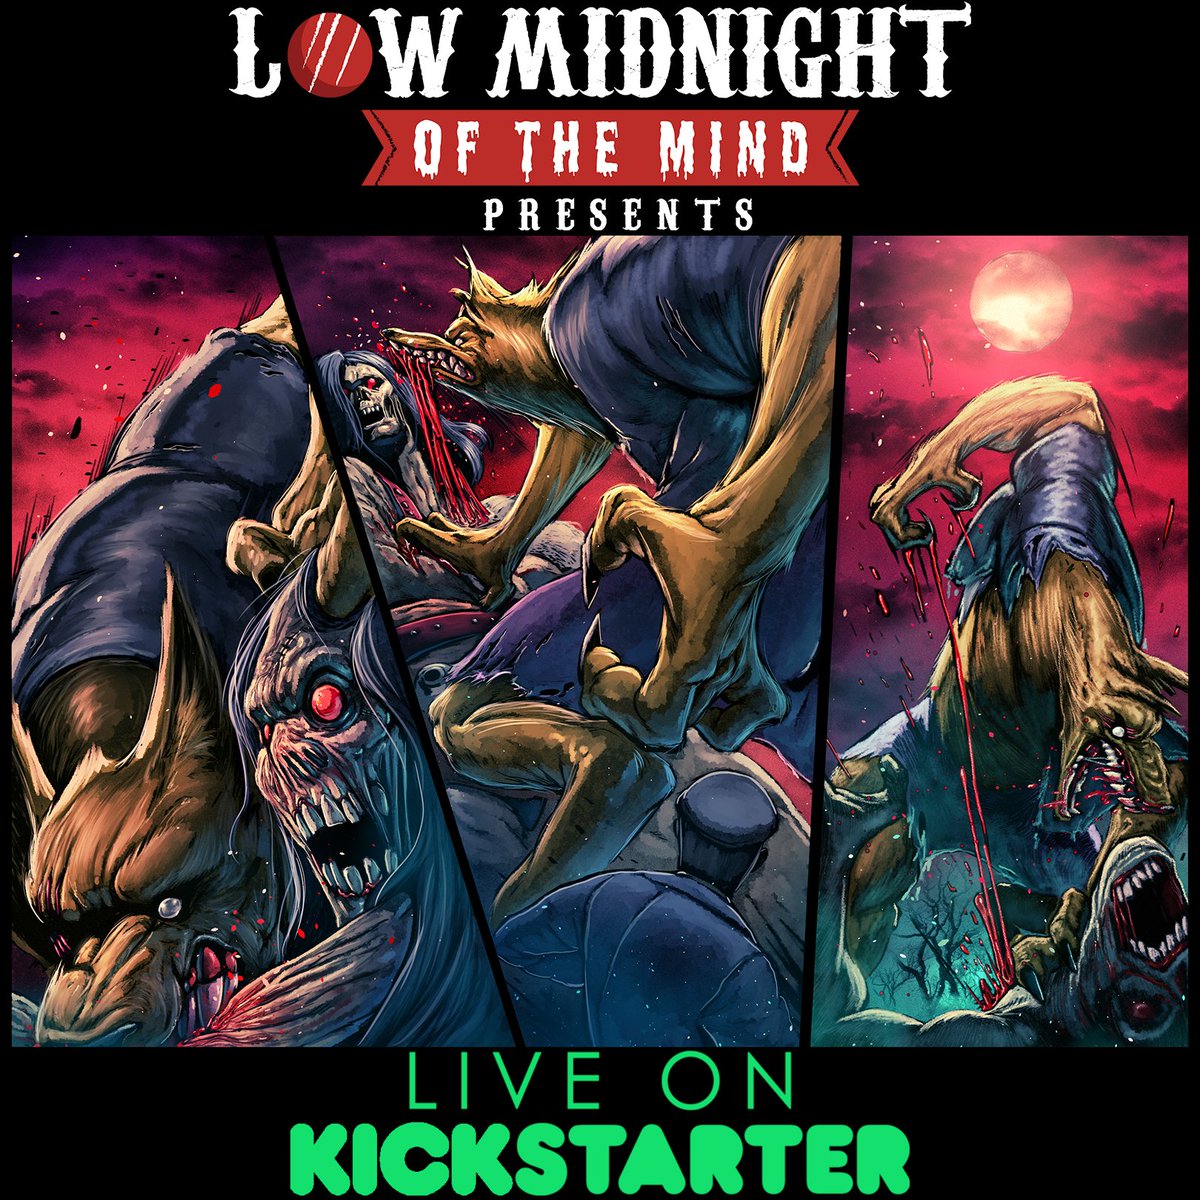 THE RETURN OF JAKE SUNRISE is 86% funded with 20 days to go! Orders ship before the end of April! This 6-issue anthology brings readers to the WEIRD WEST, where cowboys face off against monsters! 
#indiecomics #crowdfundingcomics #kickstartercomics #werewolf #bigfoot #vampire